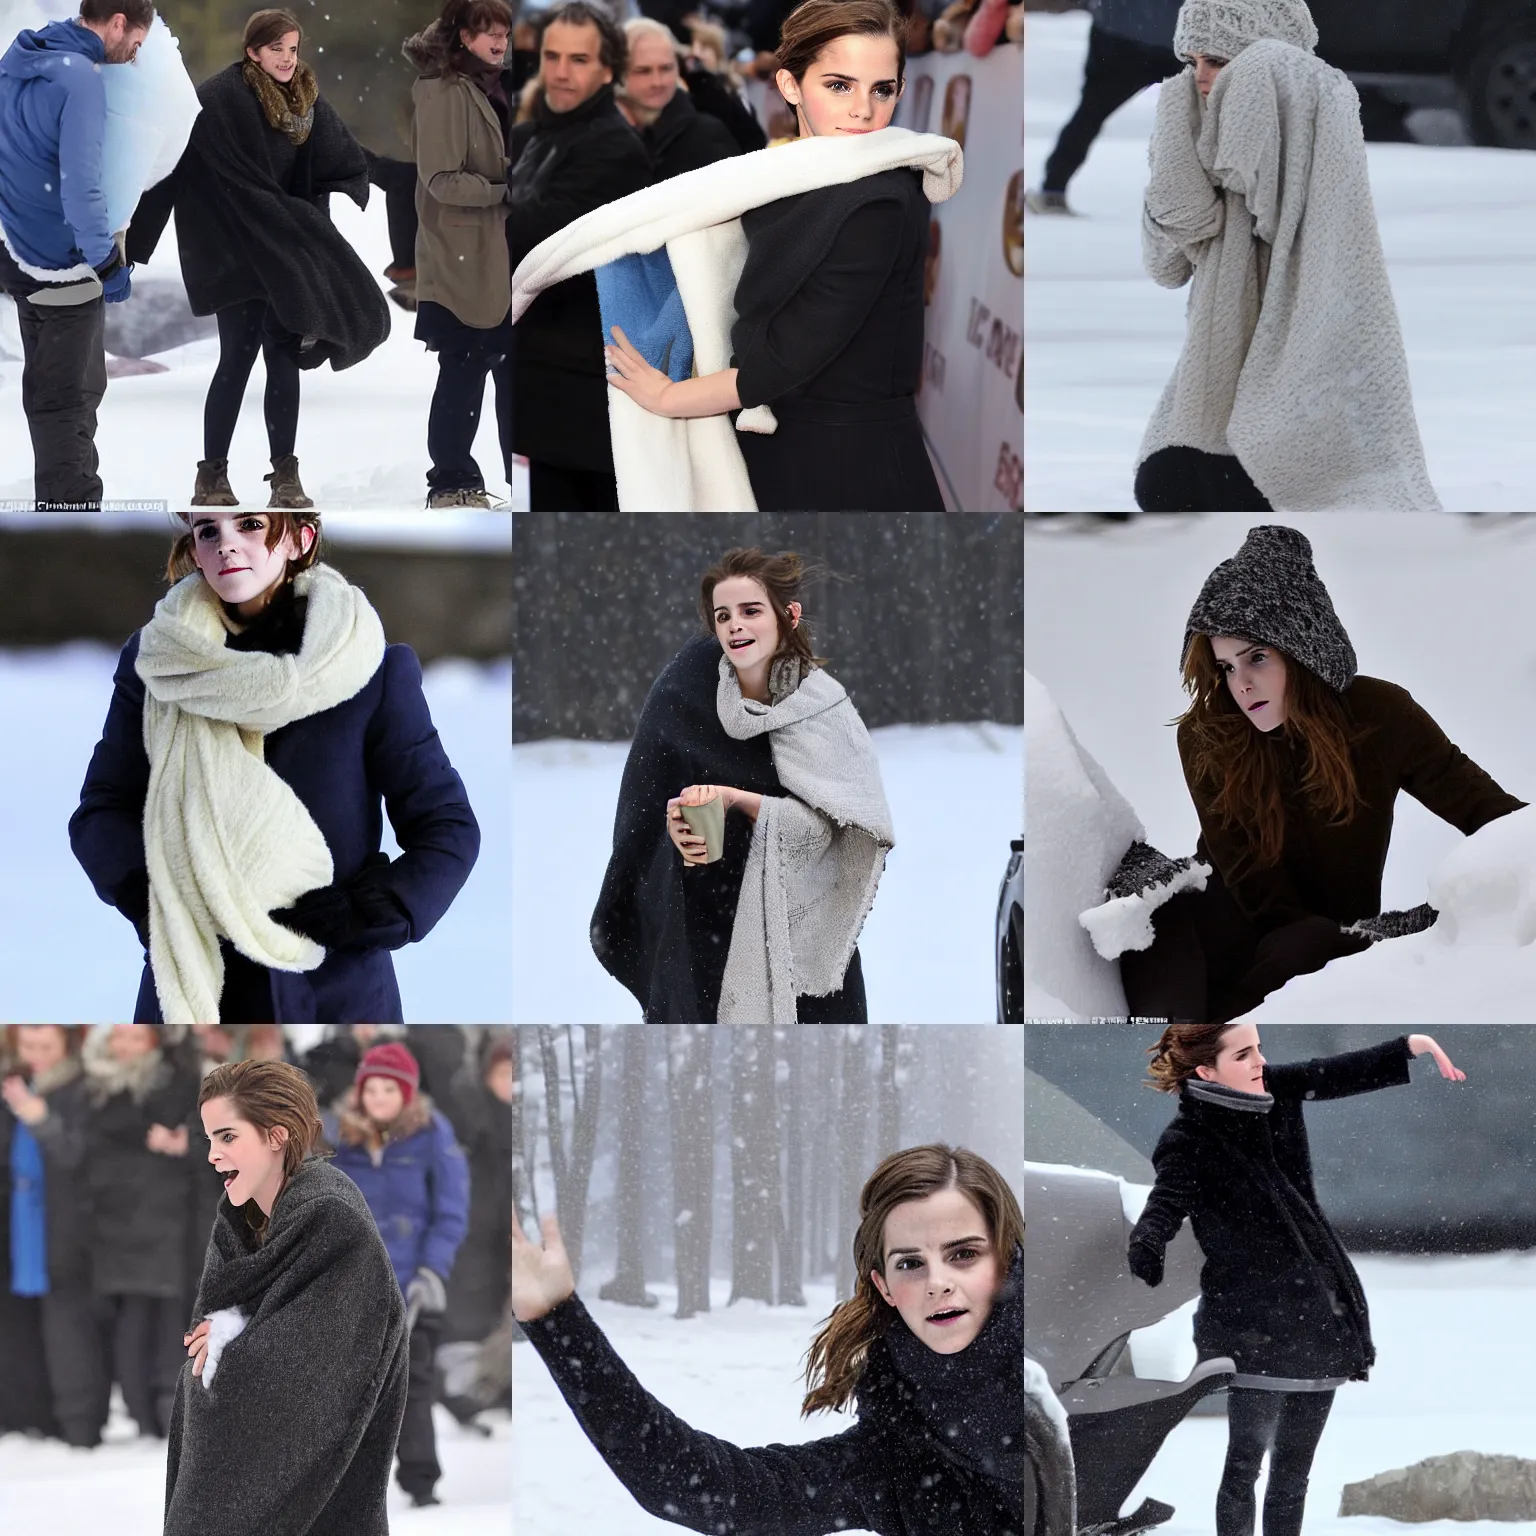 Prompt: chilly in snowdrift emma watson reaching for blanket out of reach